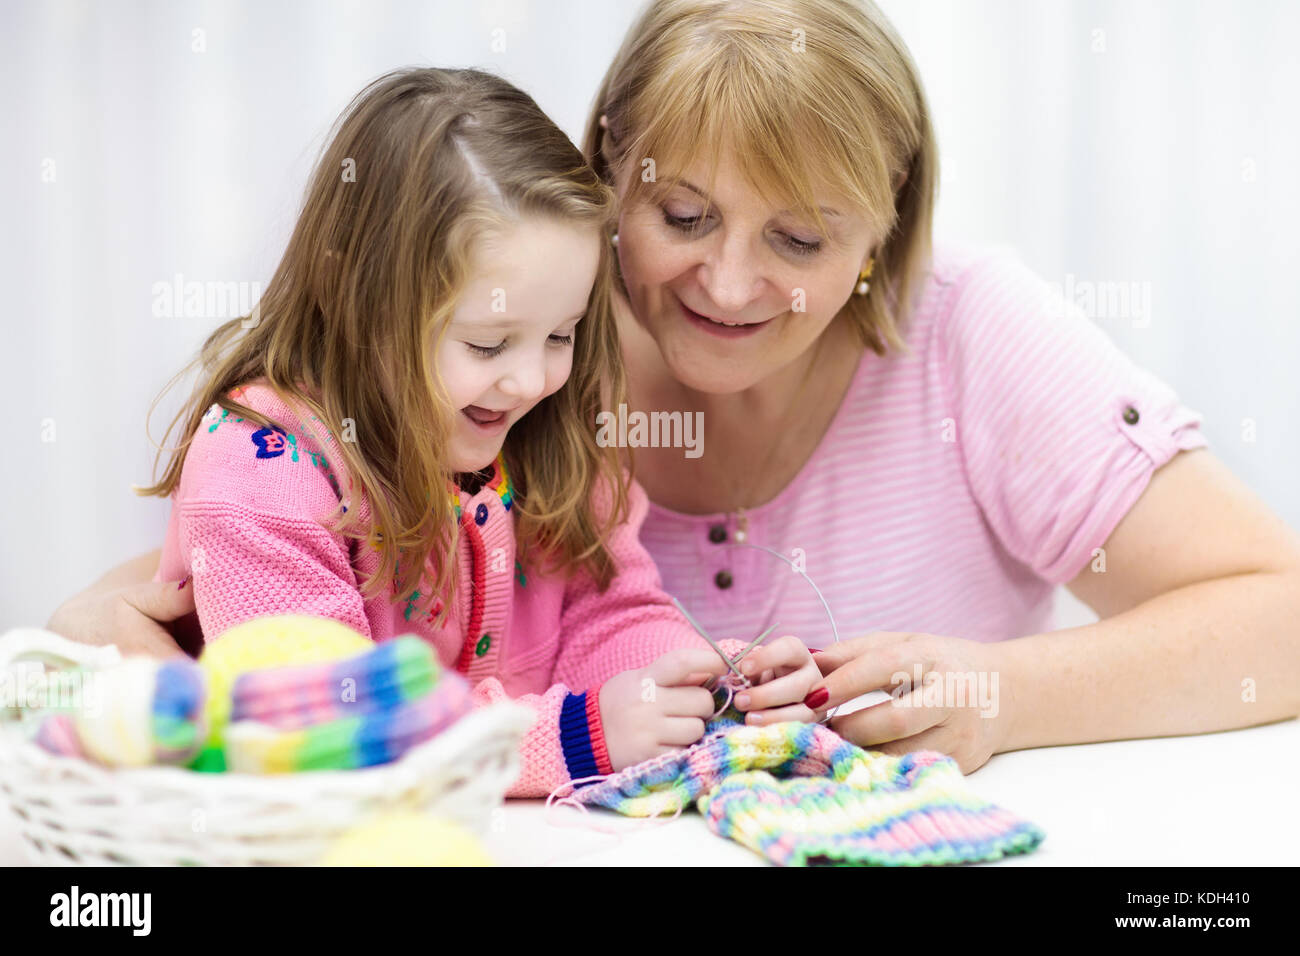 mother-and-child-knitting-mom-teaching-little-girl-to-knit-crafts-KDH410.jpg